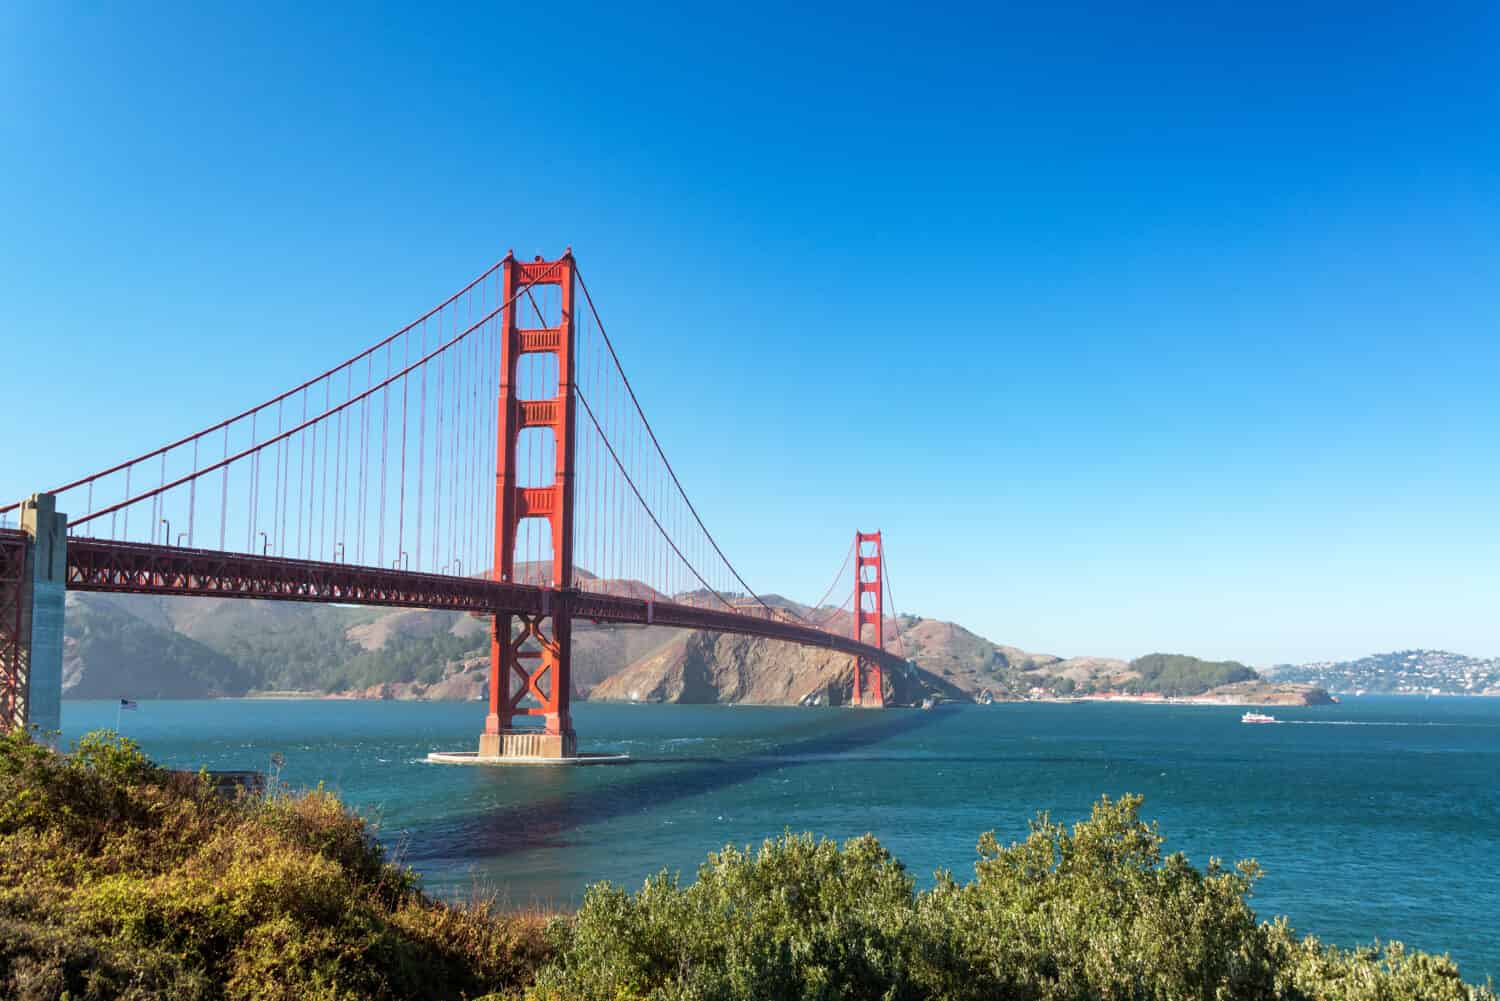 View of the iconic Golden Gate Bridge in San Francisco, California